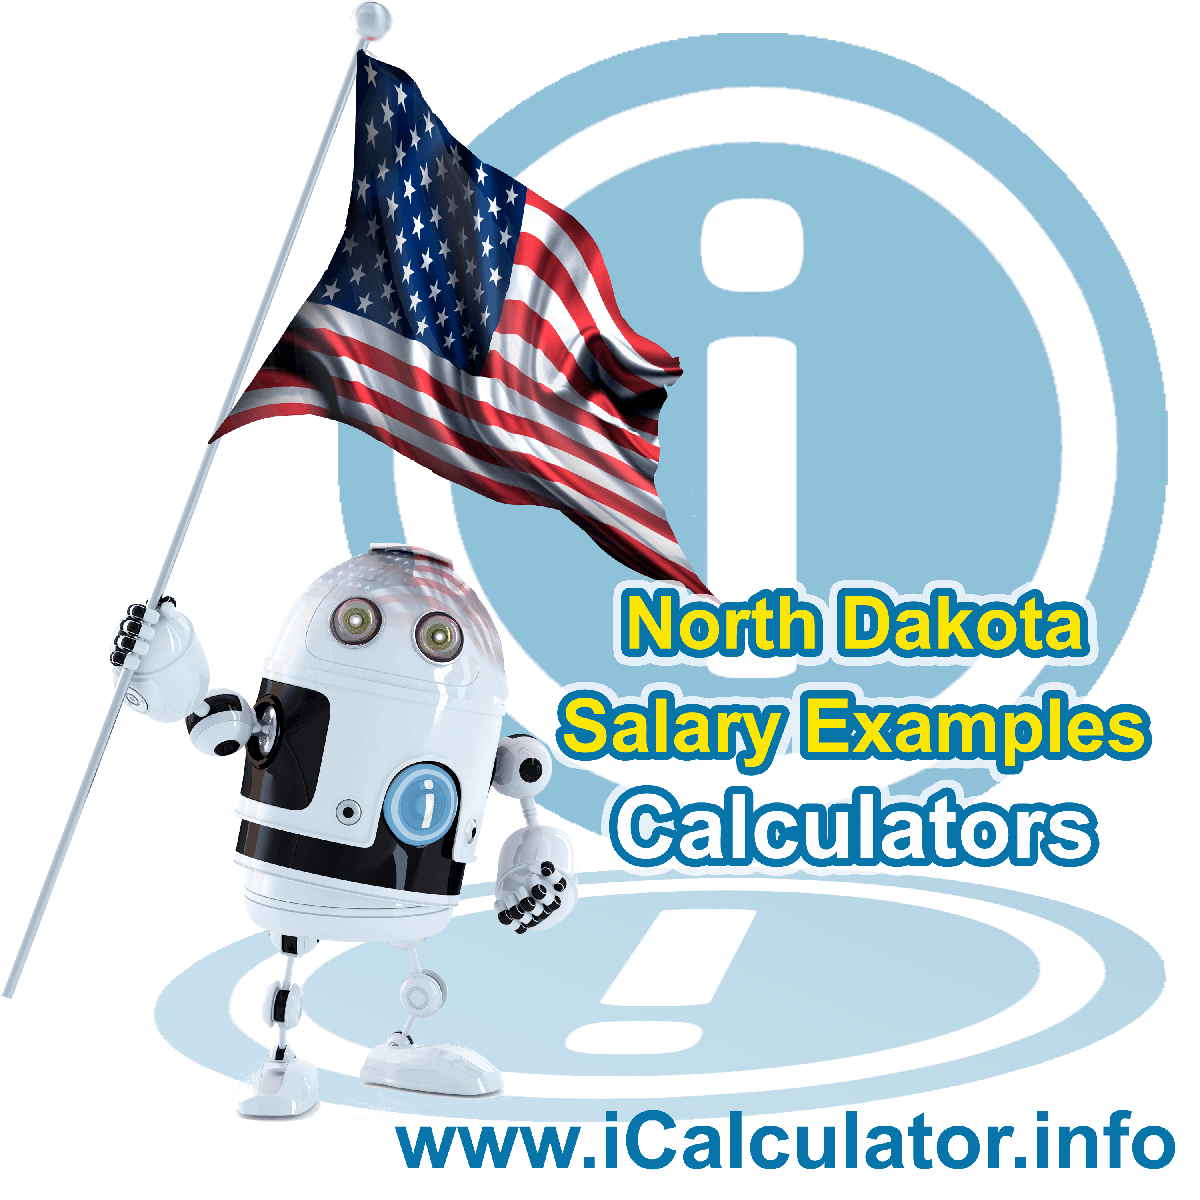 North Dakota Salary Example for $ 280,000.00 in 2023 | iCalculator™ | $ 280,000.00 salary example for employee and employer paying North Dakota State tincome taxes. Detailed salary after tax calculation including North Dakota State Tax, Federal State Tax, Medicare Deductions, Social Security, Capital Gains and other income tax and salary deductions complete with supporting North Dakota state tax tables 